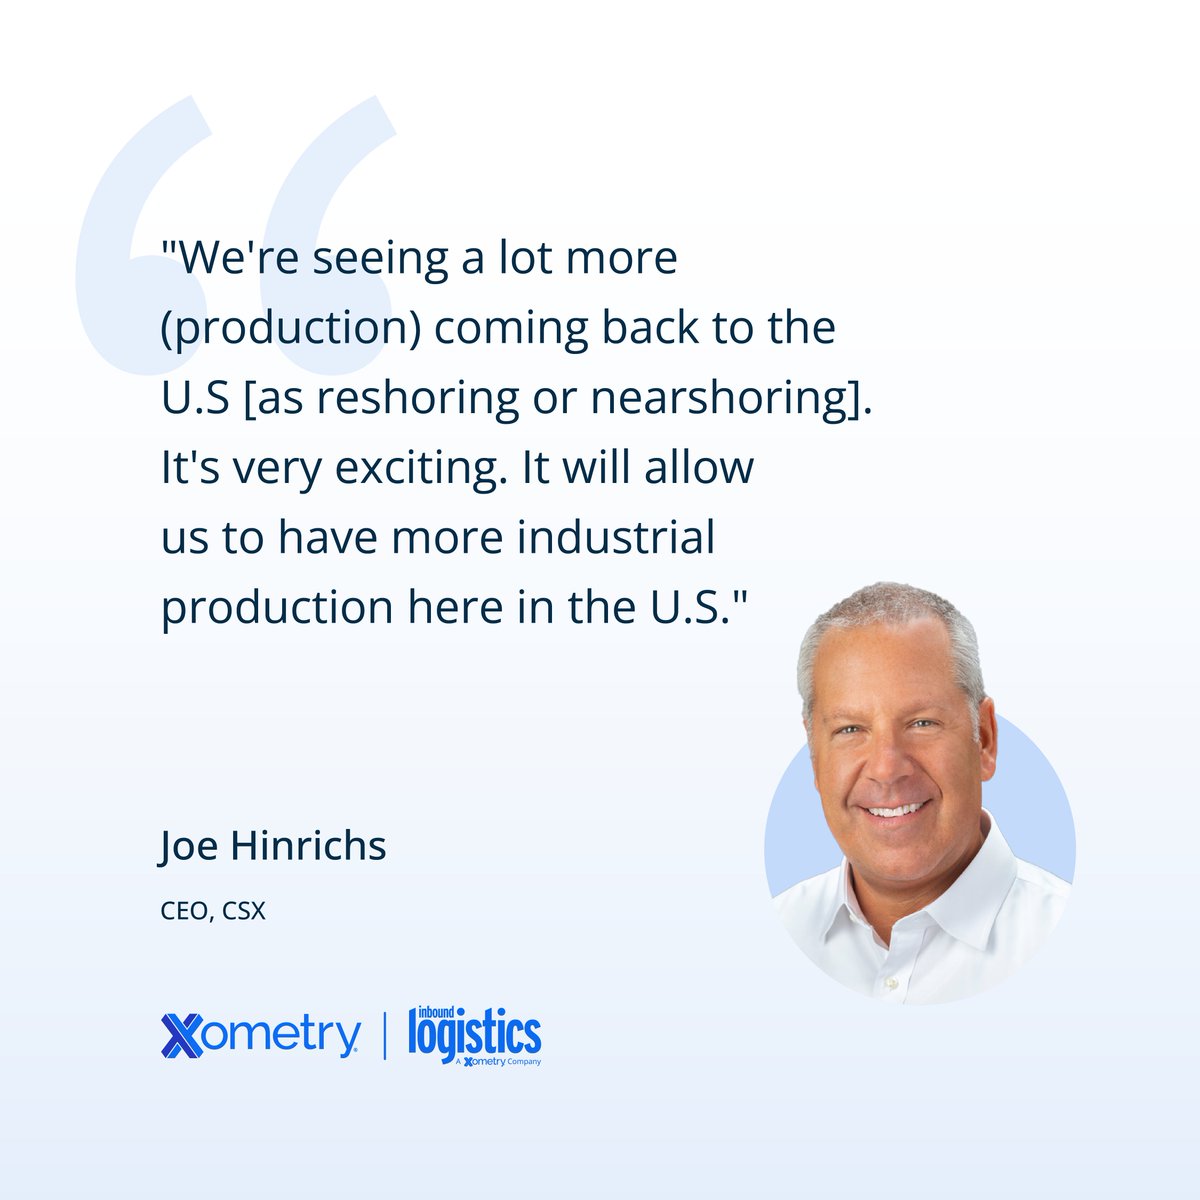 On one of the latest episodes of the Inbound Logistics Podcast, Xometry's Senior Vice President of Enterprise Sales, Wes Norris, and the President & CEO of CSX, Joe Hinrichs, unveiled their insights into the manufacturing trends to watch out for this year: loom.ly/7j-rlZs